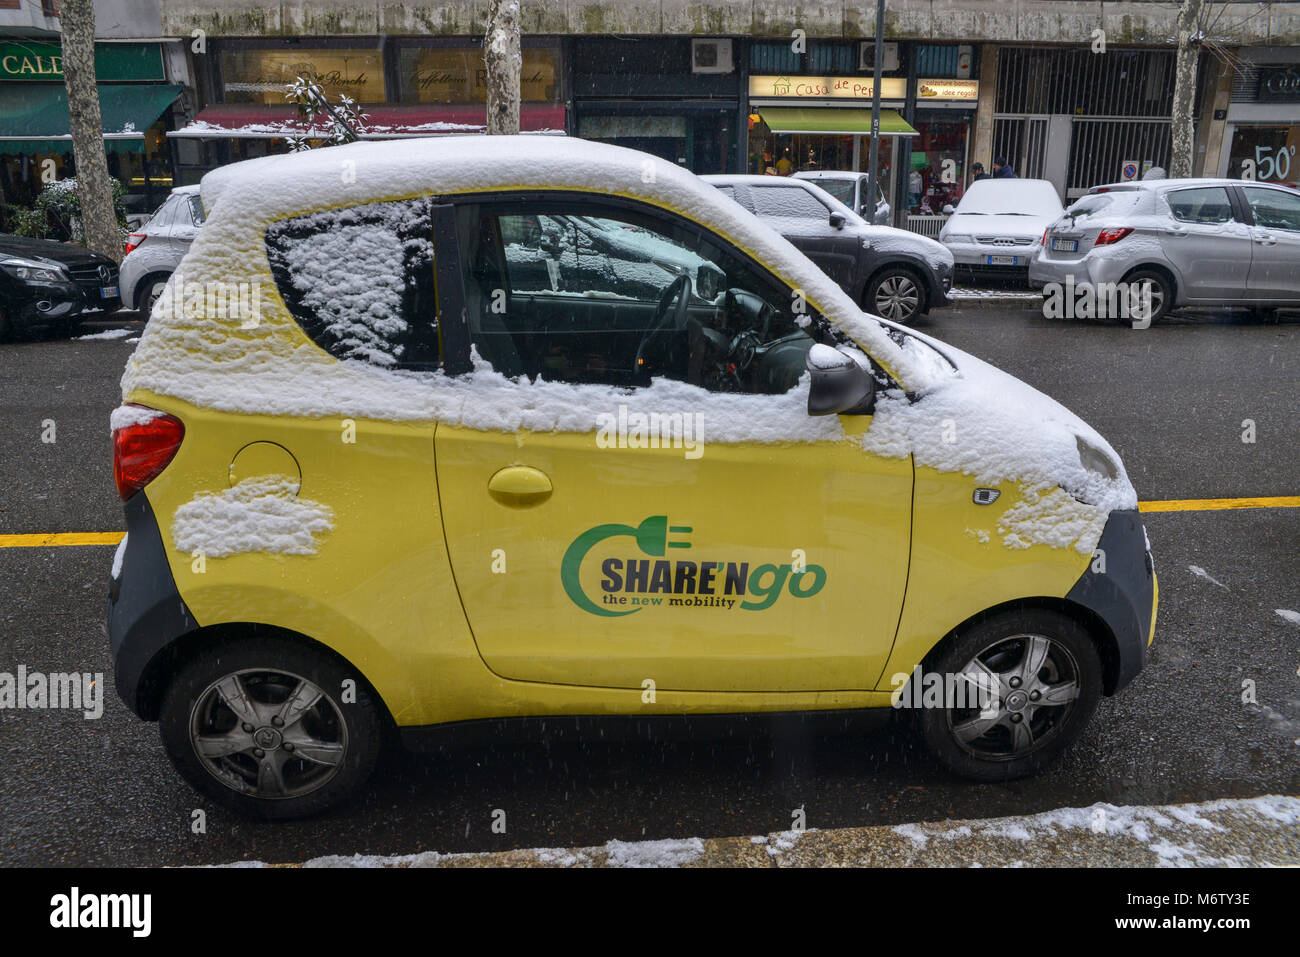 Share 'n Go car on a street in Milan, Lombardy, Italy as part of the sharing economy Stock Photo